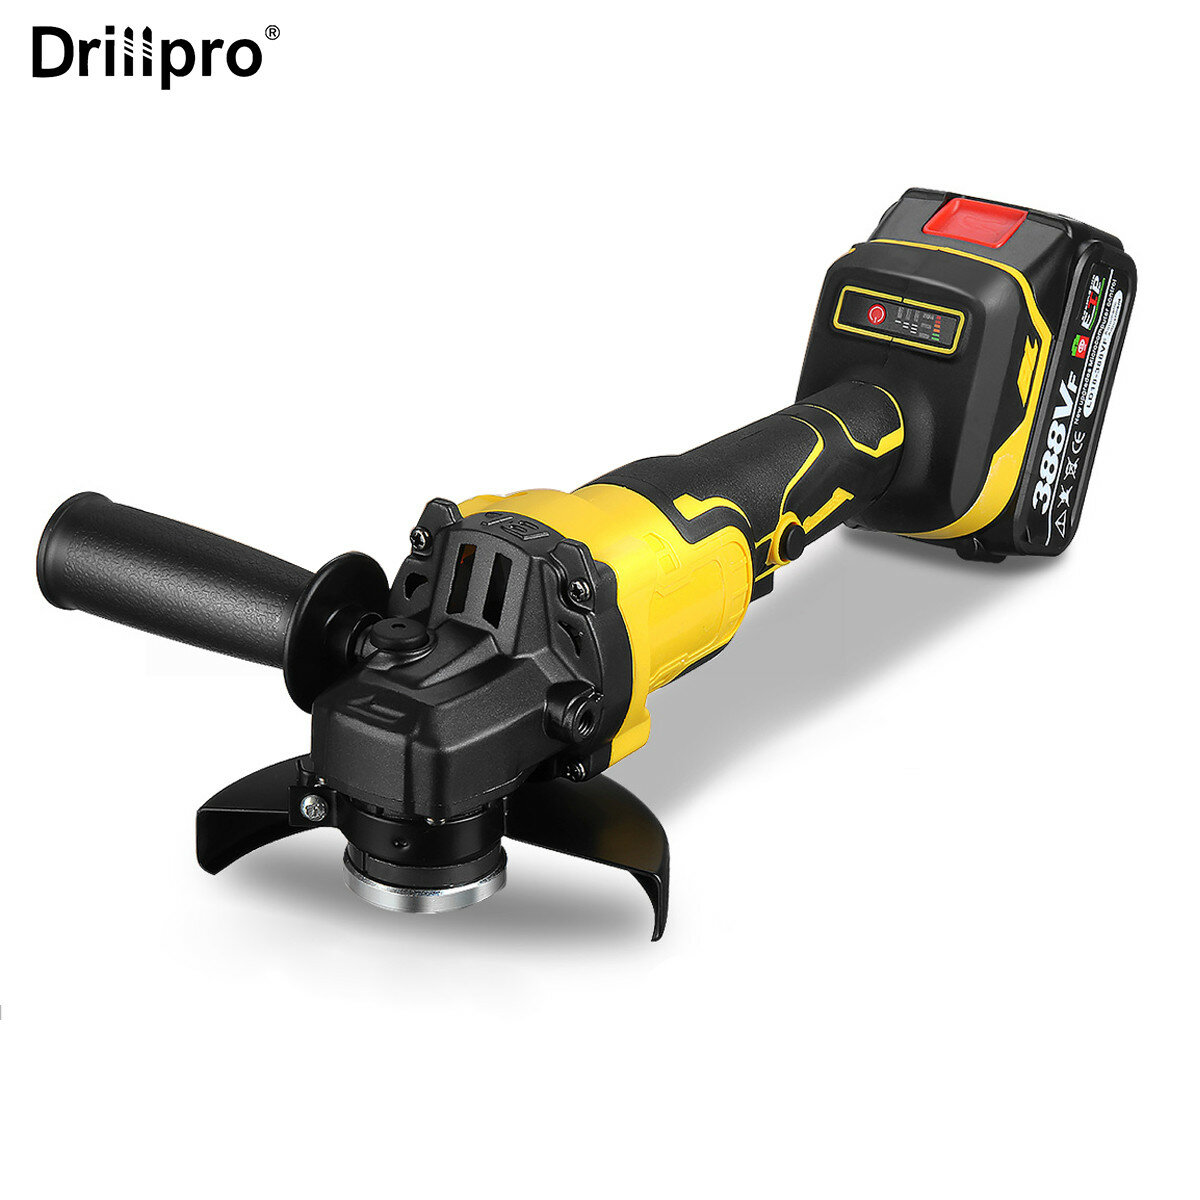 

Drillpro 388VF 1280W 8500rpm 3 gears 125mm Brushless Lithium Electric Angle Grinder for Makiita 18V Battery